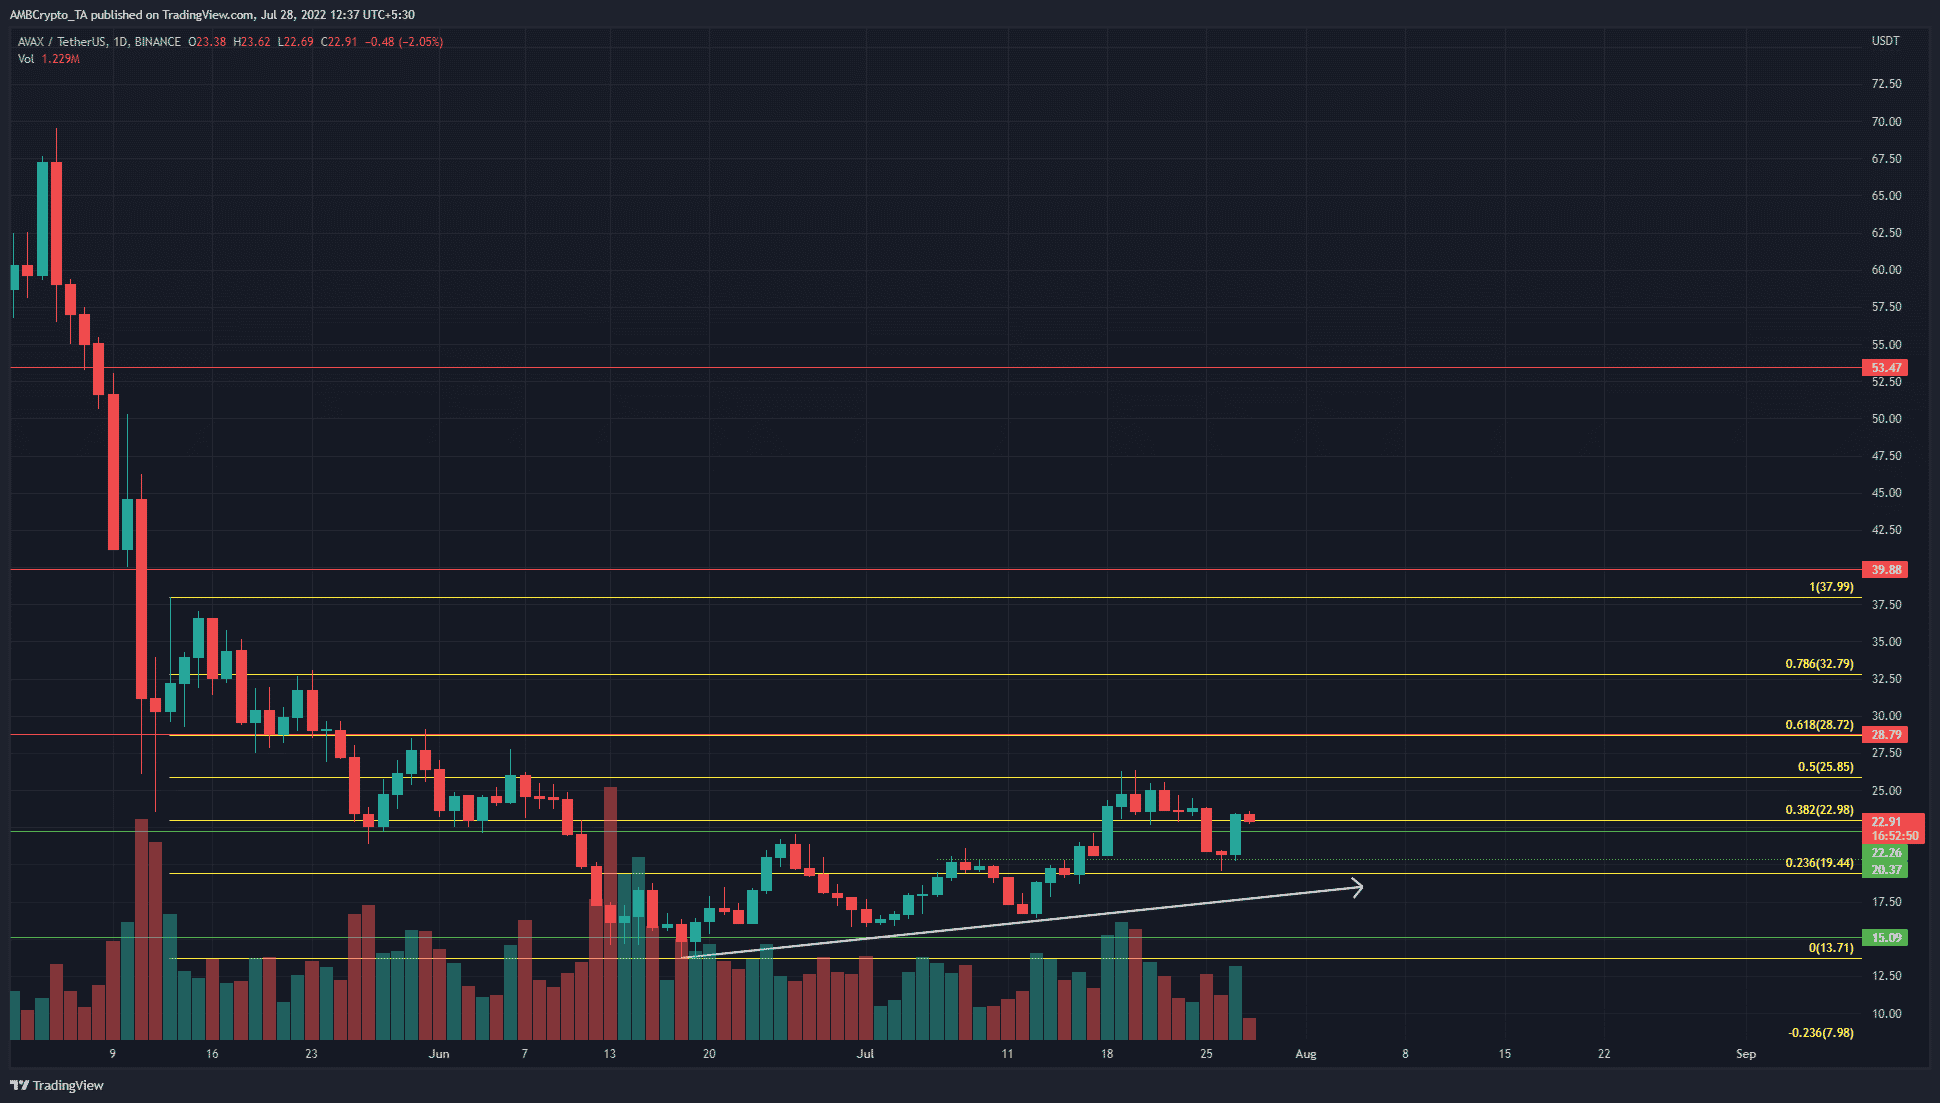 Avalanche crosses the $23 mark, was it a trap or was a longer-term uptrend about to begin?